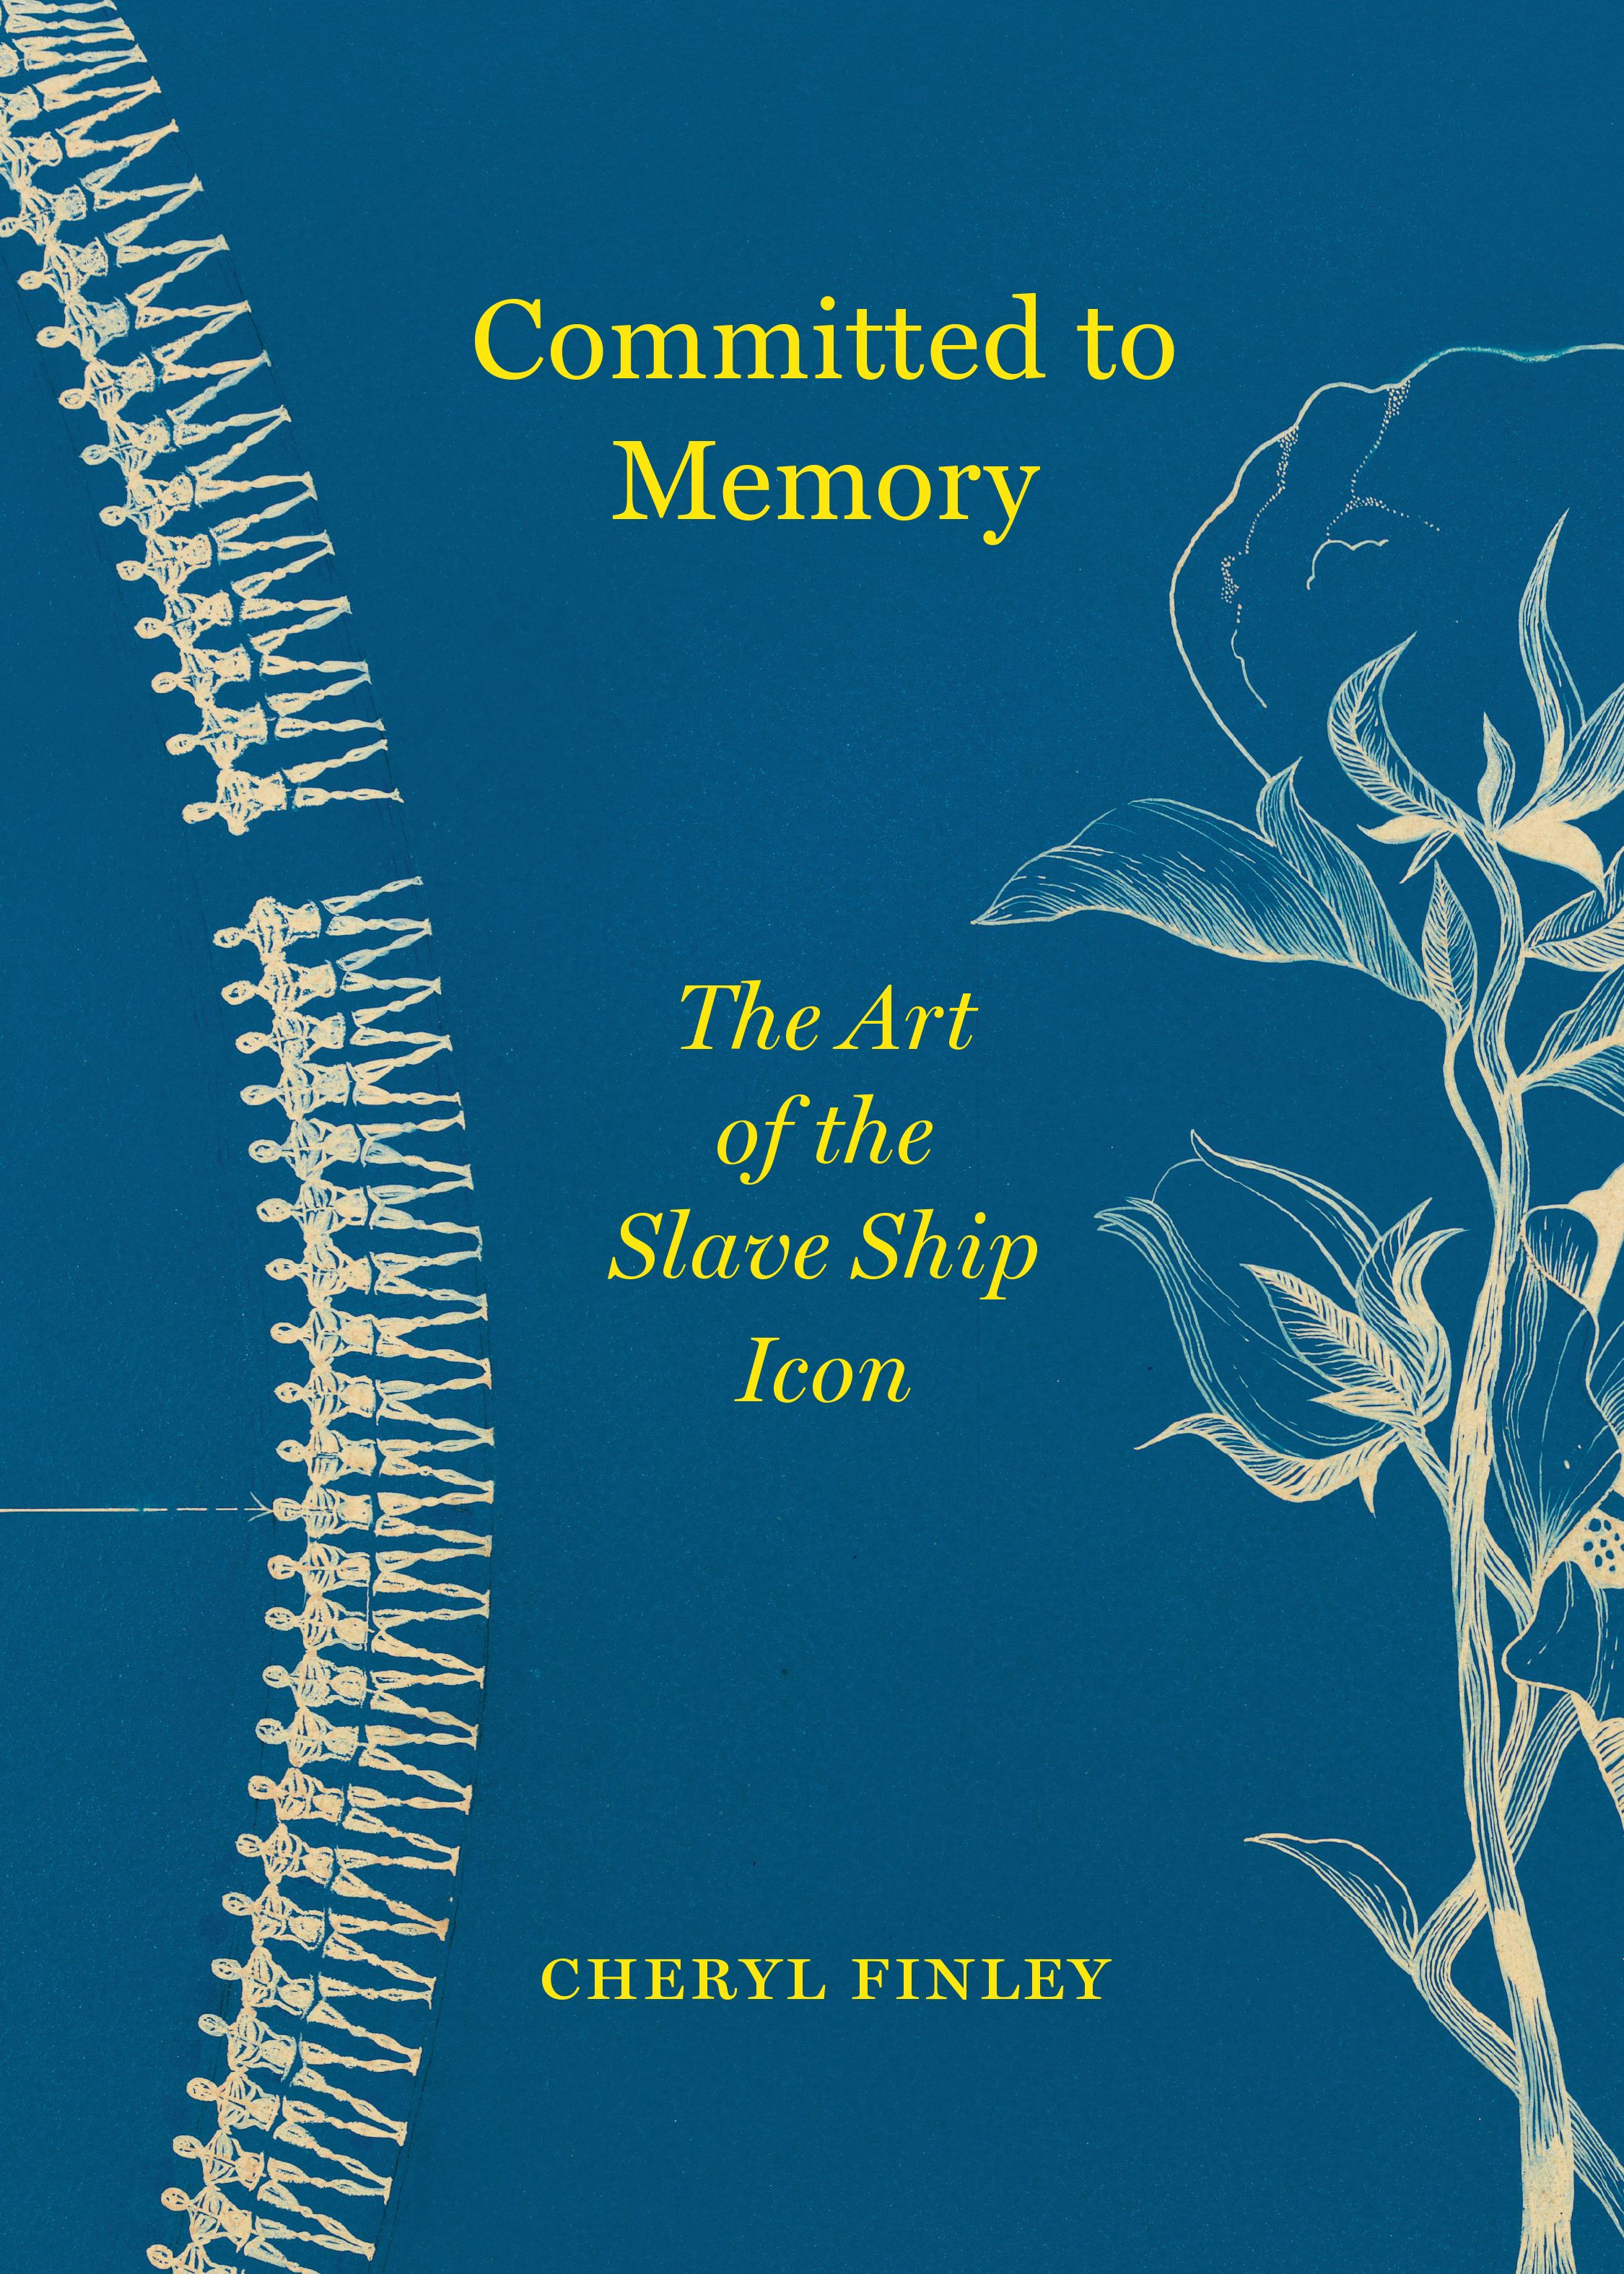 Cover, Cheryl Finley's "Committed to Memory: The Art of the Slave Ship Icon"